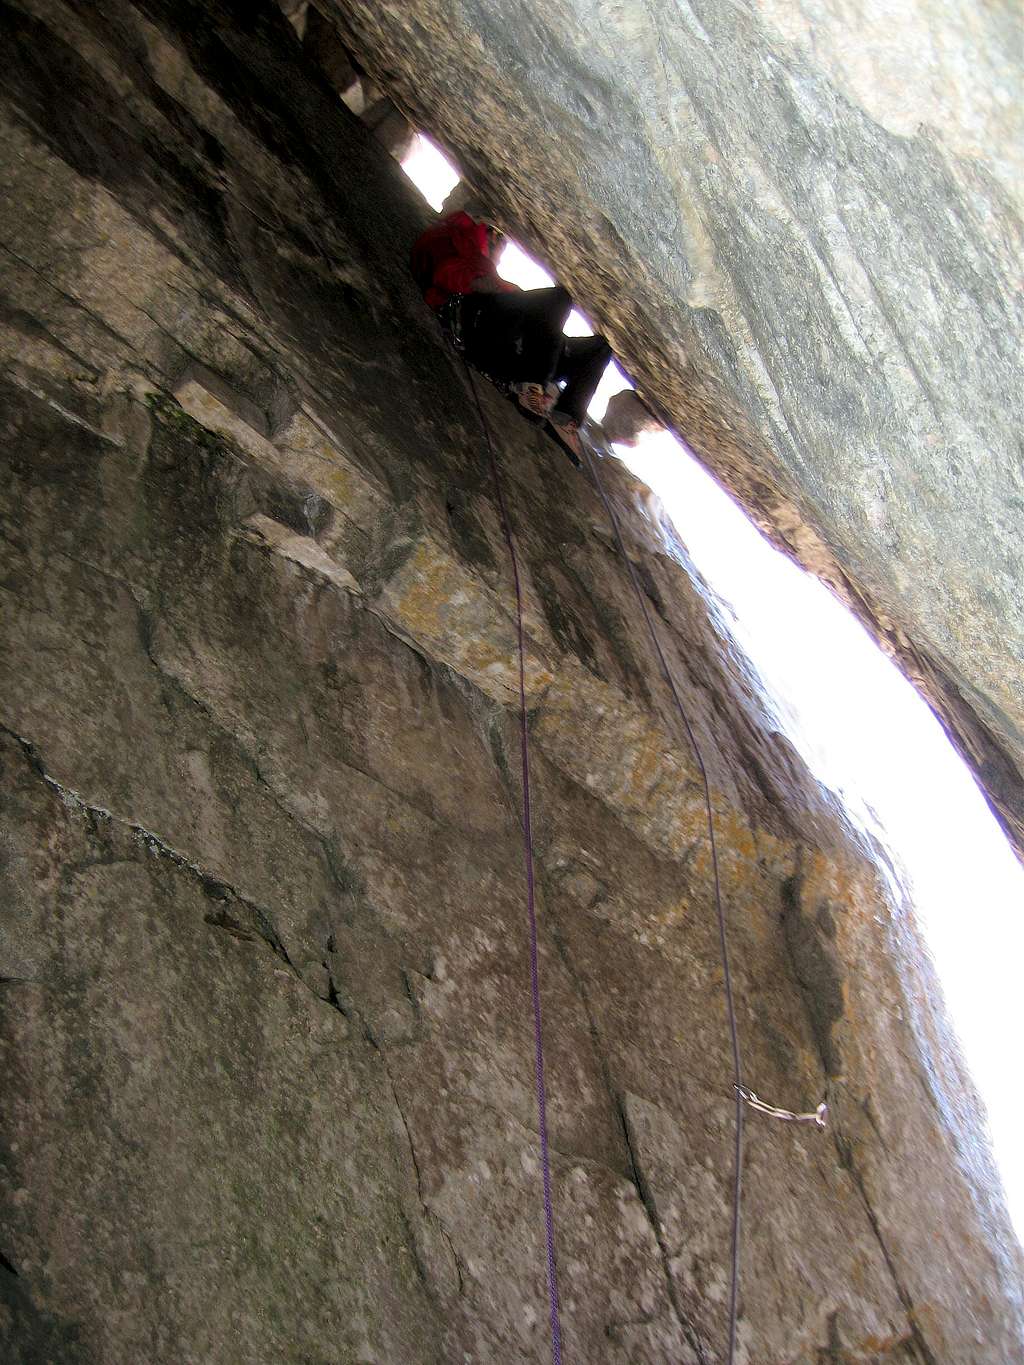 Scotty Nelson leads through the first chimney on the Winter Chimney